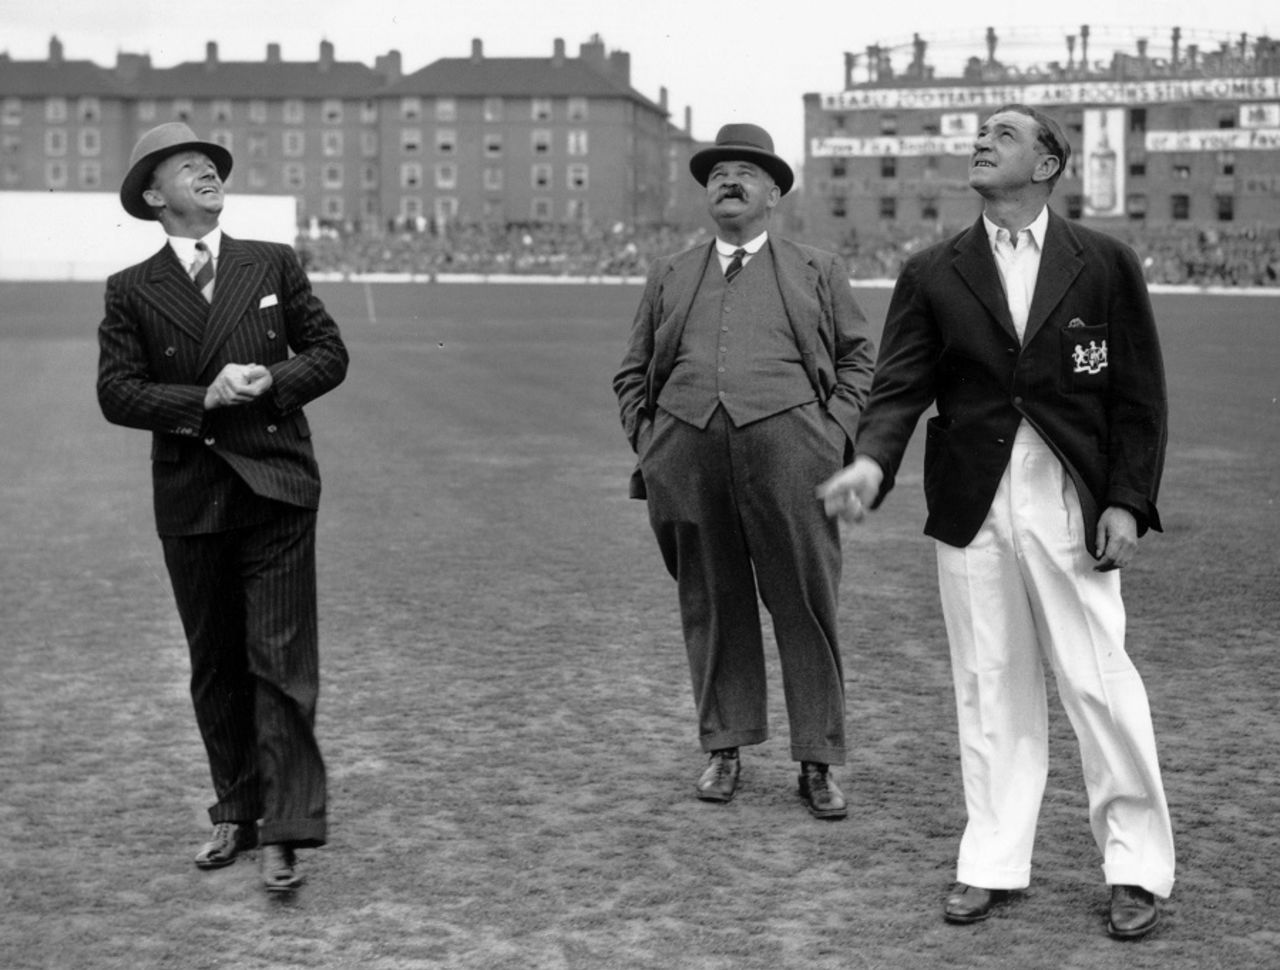 Don Bradman and Wally Hammond tosss, watched by groundsman Bosser Martin, England v Australia, The Oval, August 20, 1938